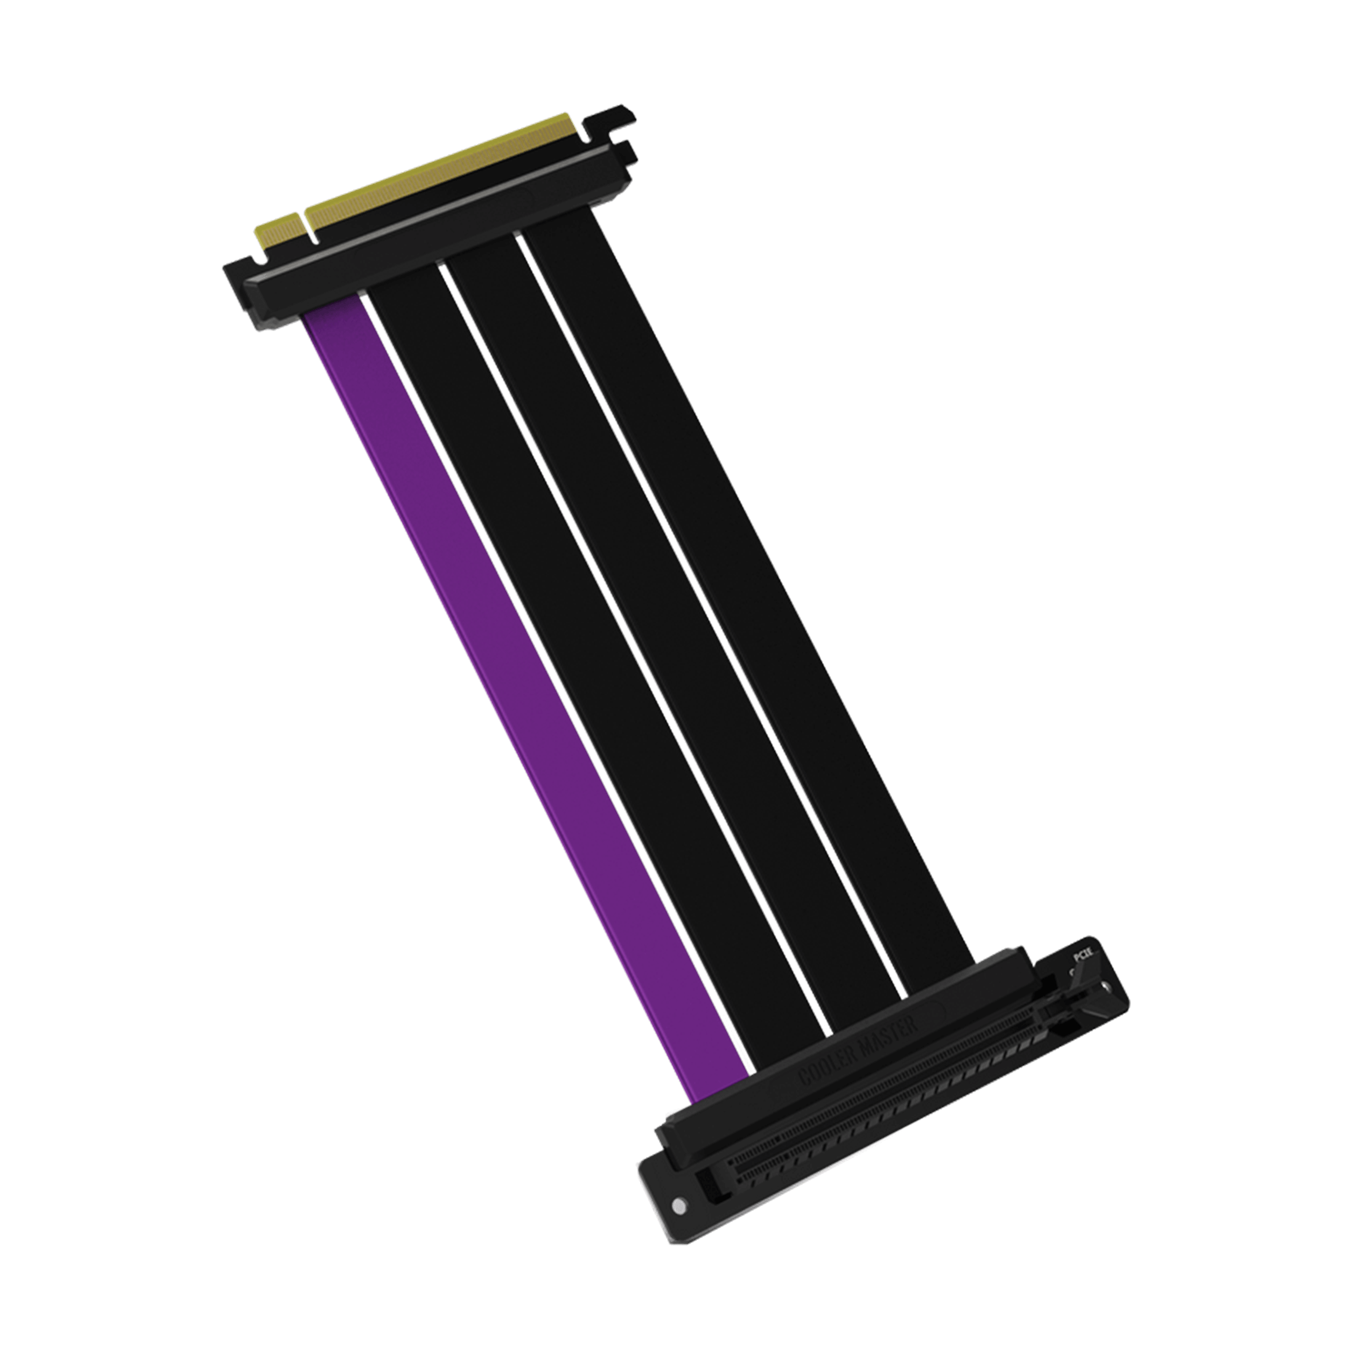 Cable Riser Cooler Master PCIe 4.0 x16 200mm